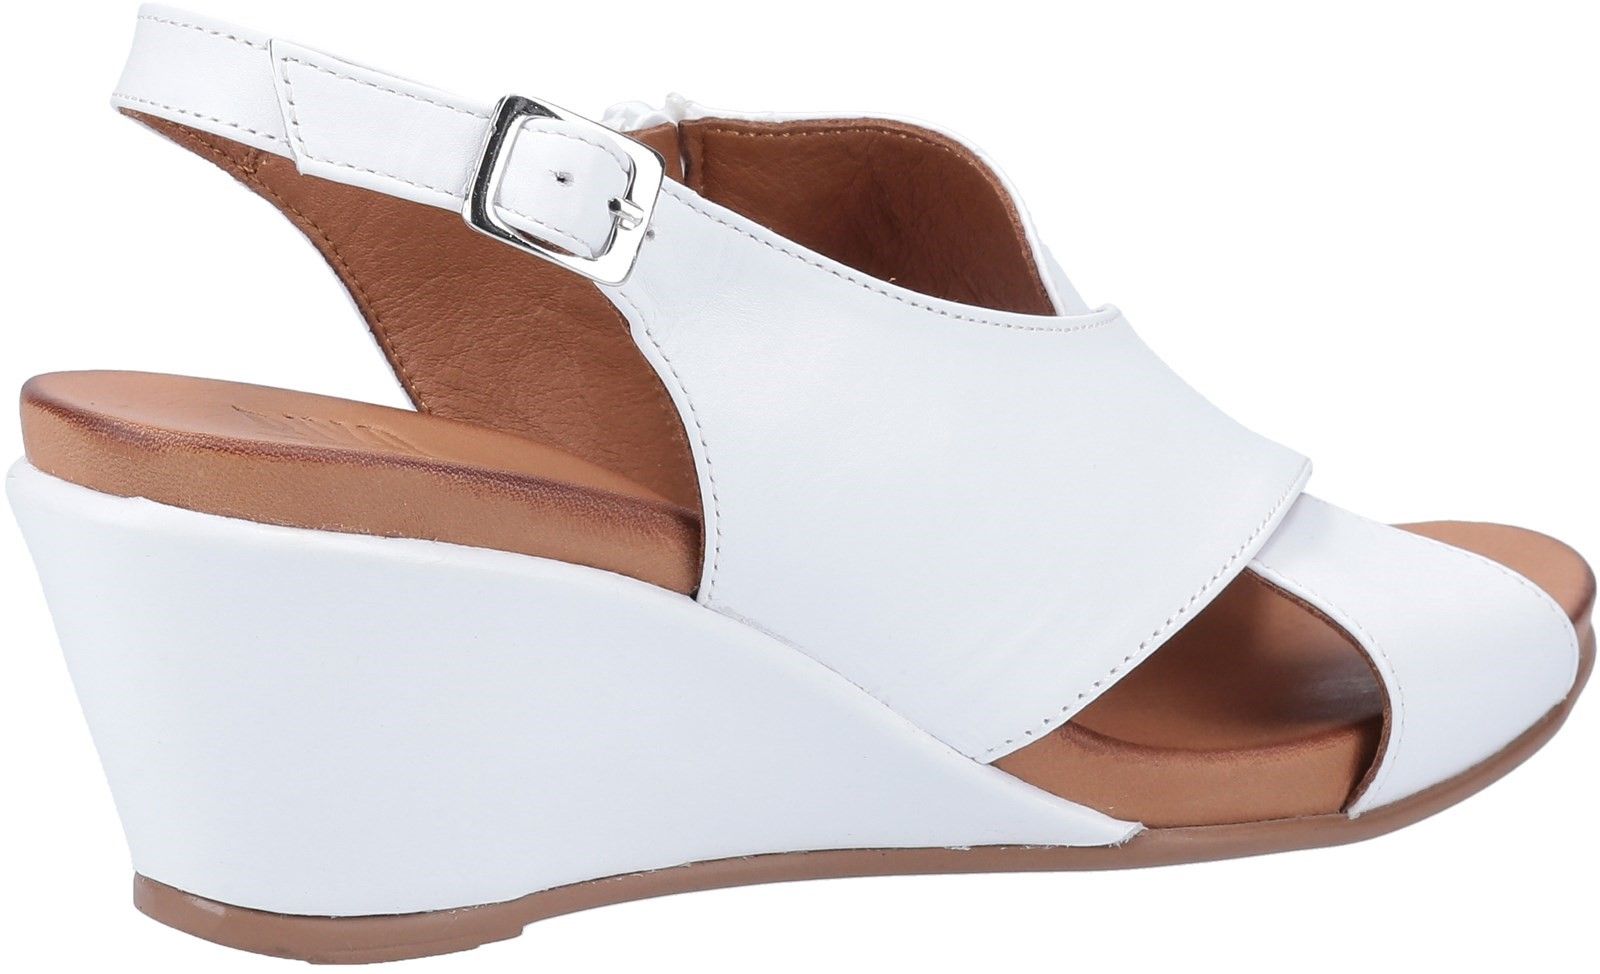 Riva Penne is a womens stylish and versatile wedge heeled slingback sandal with soft leather uppers in a simple crossover design, leather lining and buckle fastening at ankle for fit adjustment.